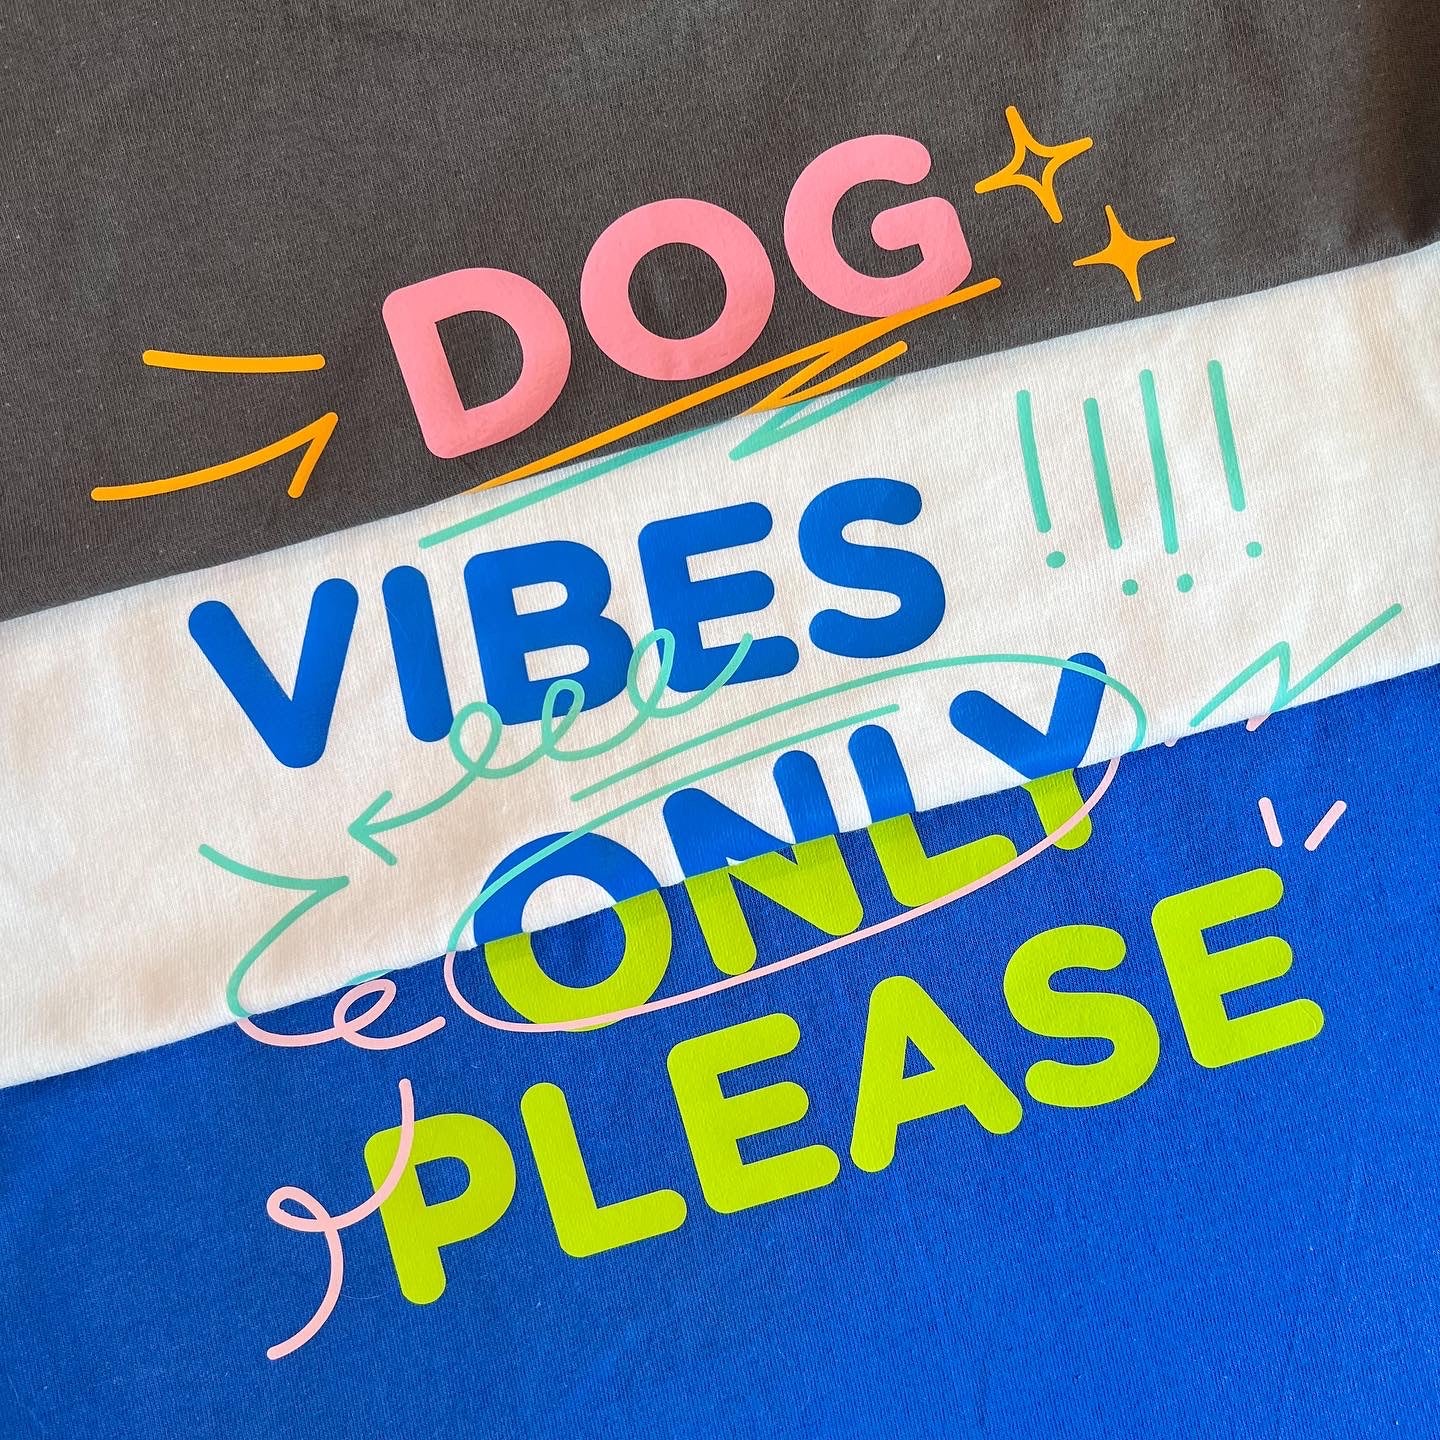 Dog Vibes Only T-Shirt